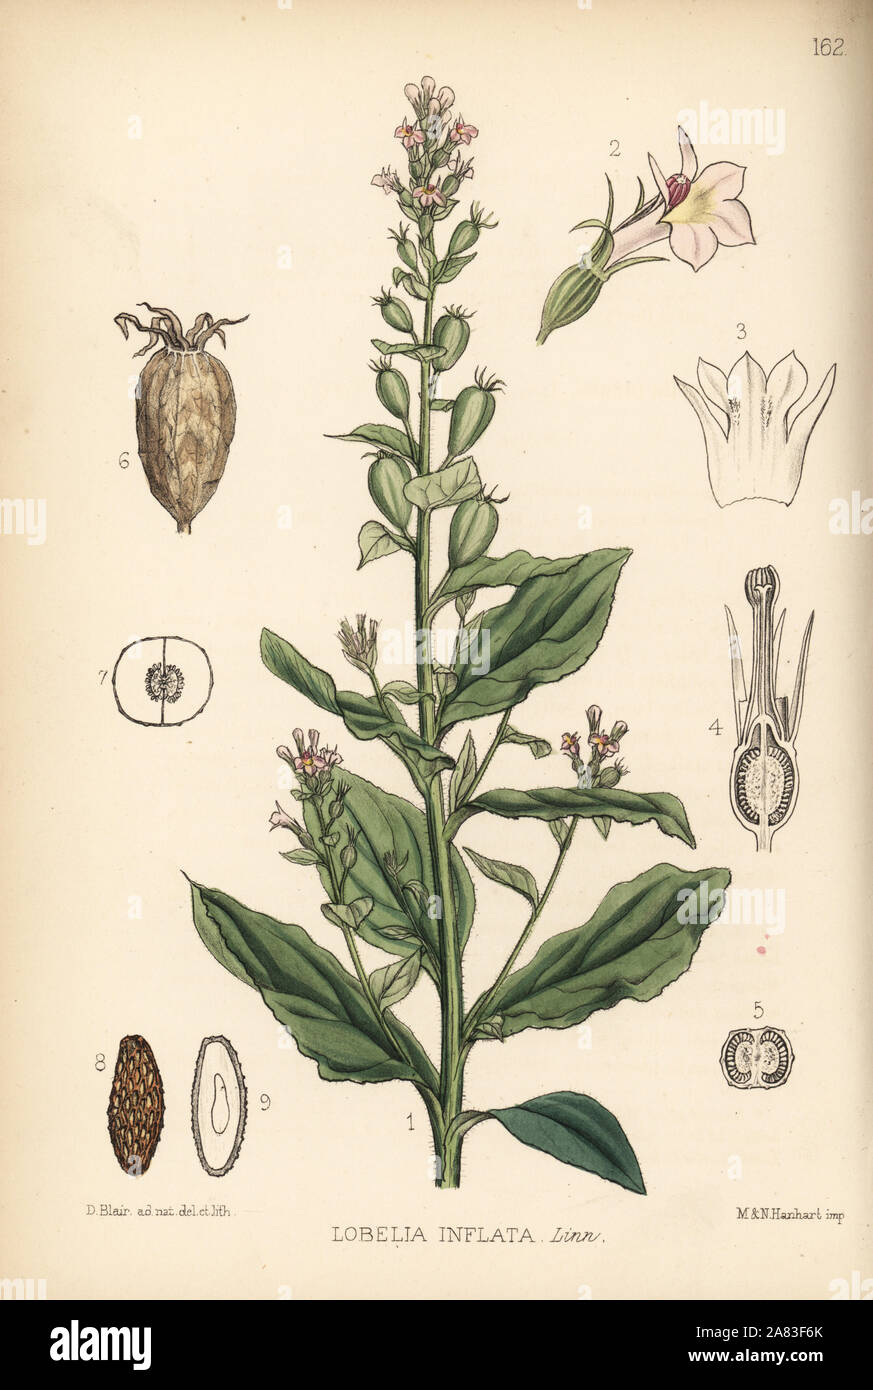 Indian tobacco, Lobelia inflata. Handcoloured lithograph by Hanhart after a botanical illustration by David Blair from Robert Bentley and Henry Trimen's Medicinal Plants, London, 1880. Stock Photo